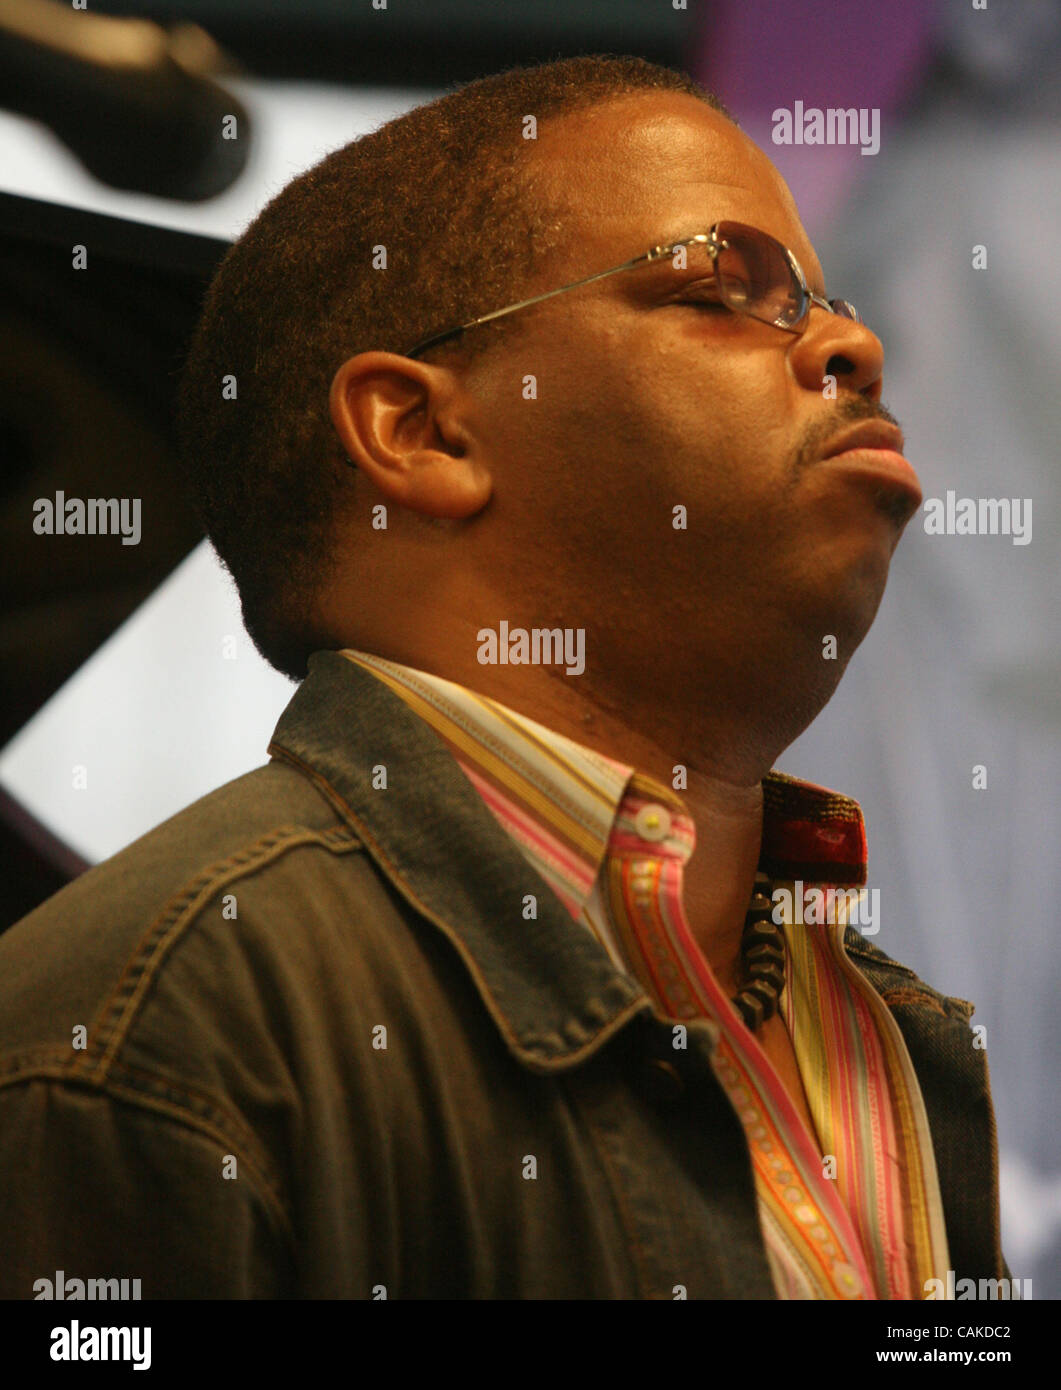 Sep 15, 2007 - New York, NY, USA - Jazz trumpeter, composer TERENCE BLANCHARD performs a live broadcast for WBGO Jazz 88.3 at J&R Music and Computer World. BLANCHARD, from New Orleans, promotes his new CD 'A Tale of God's Will : A Requiem for Katrina.' (Credit Image: © Nancy Kaszerman/ZUMA Press) Stock Photo